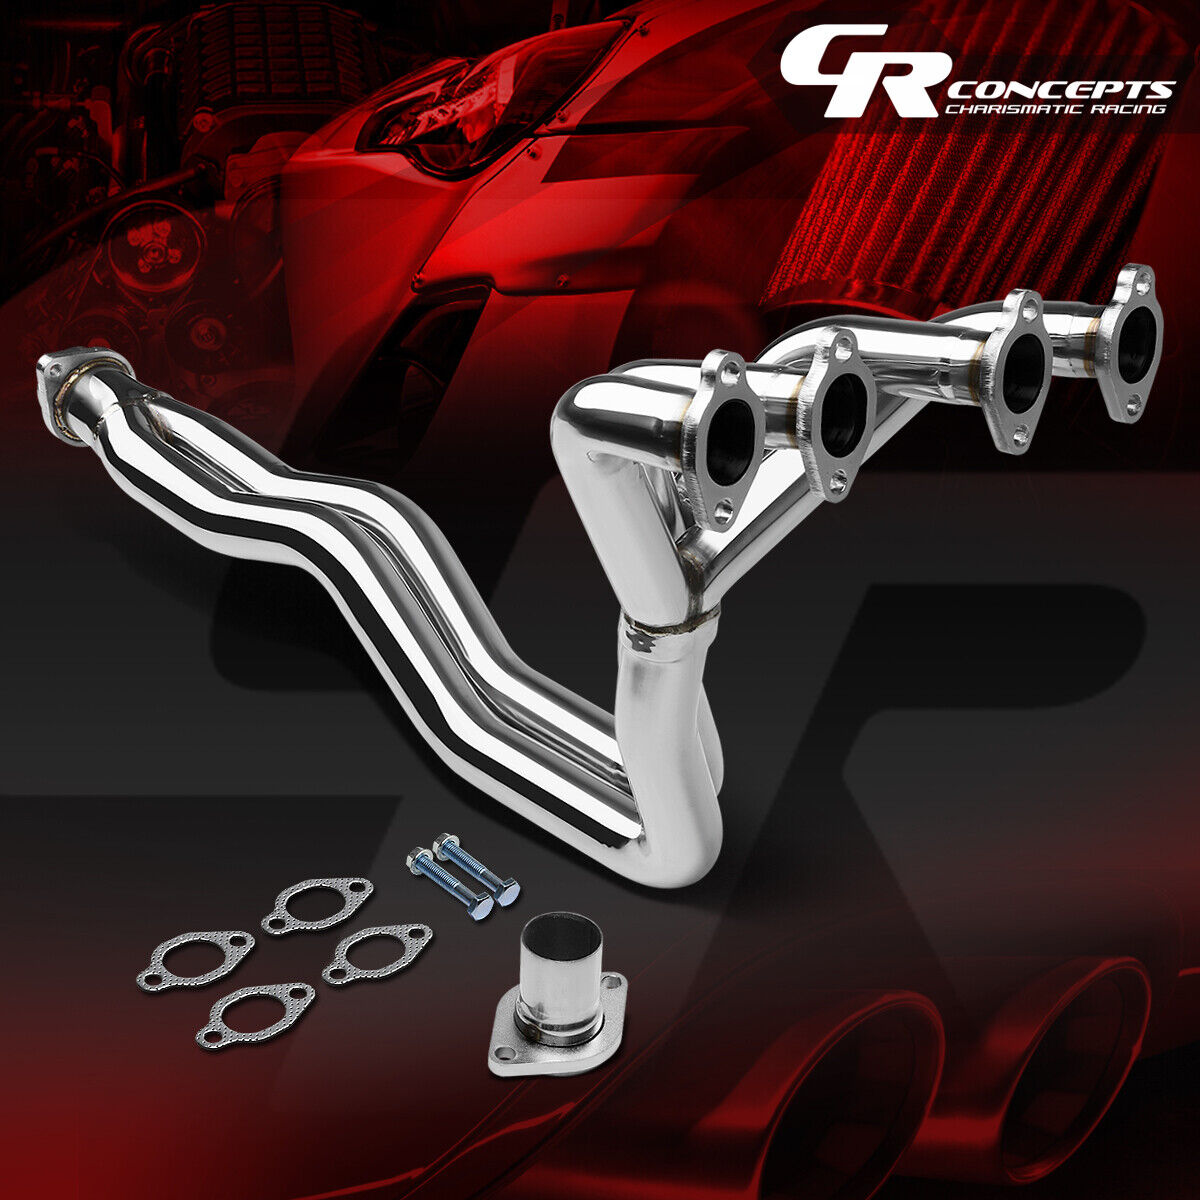 FOR VW GOLF MK1/17 1.6/1.8 STAINLESS STEEL EXHAUST MANIFOLD 4-2-1 RACING HEADER